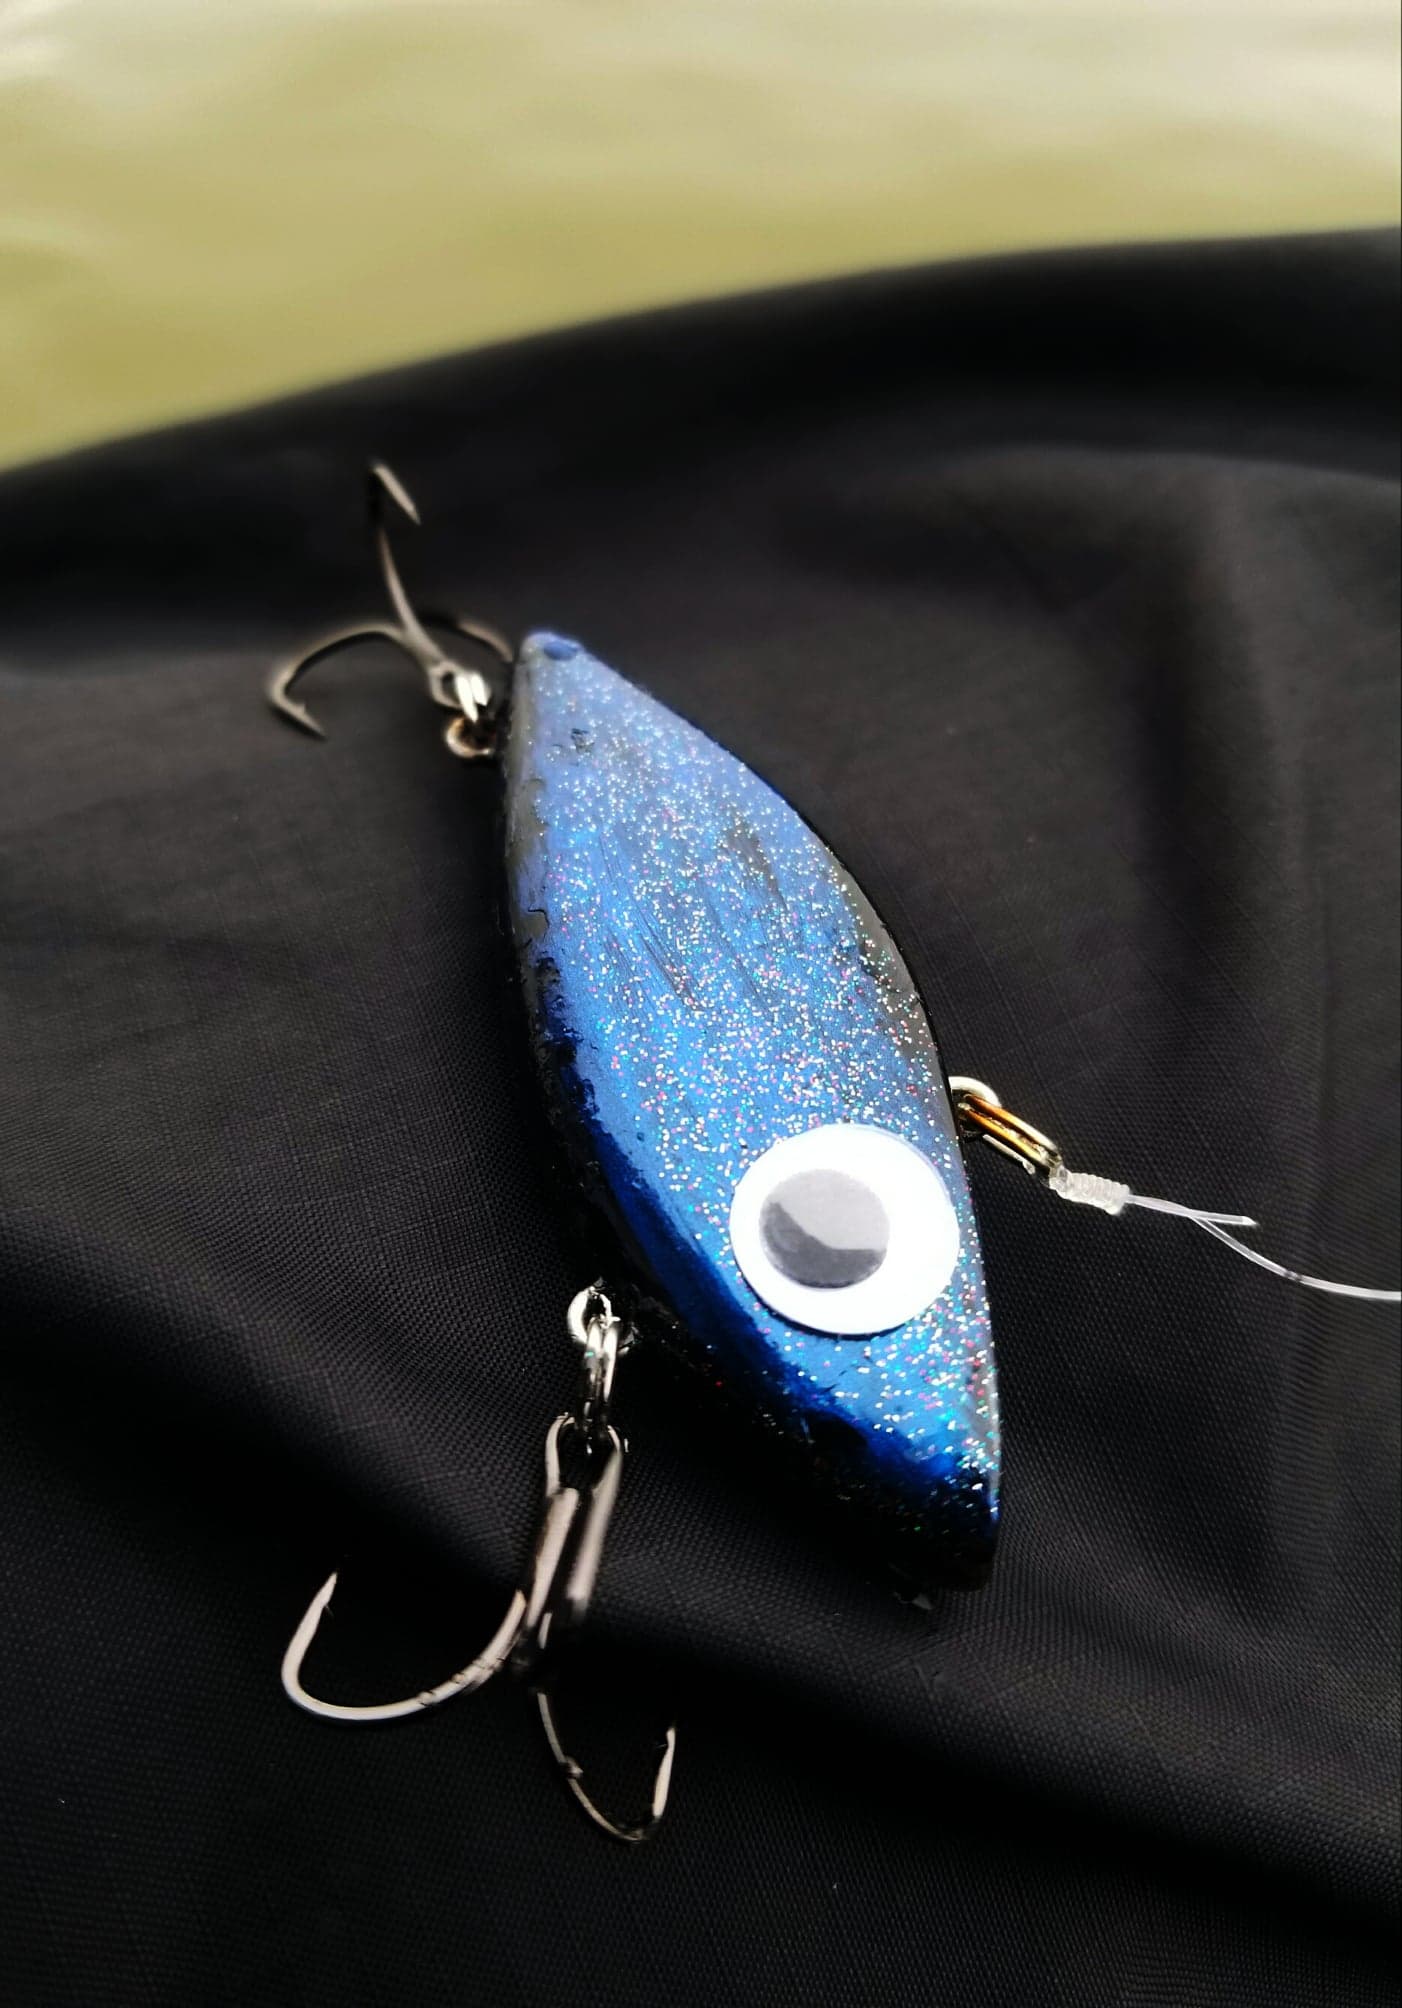 A sparkle blue Rattle Trap lure tied onto a fishing line